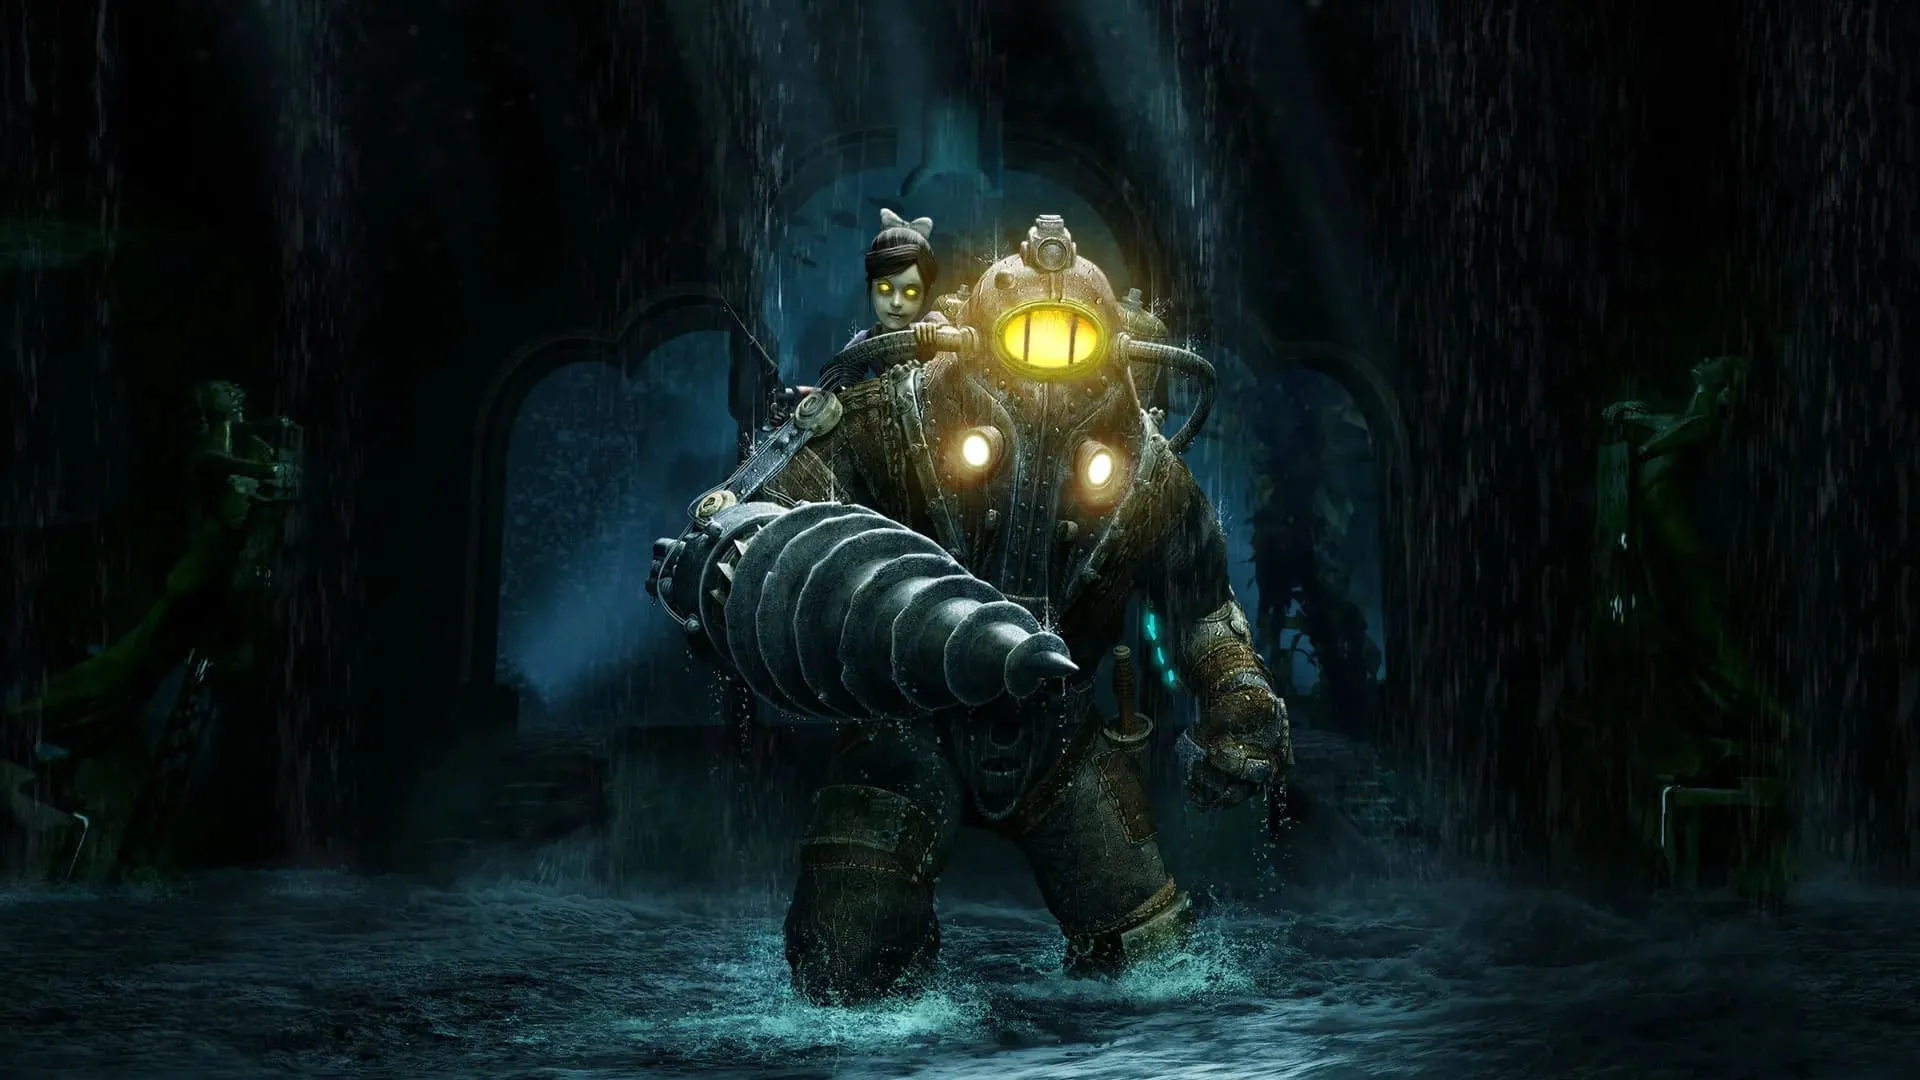 The Movie 'BioShock' Has New Developments: Directed by Francis Lawrence, Written by Michael Green | FMV6